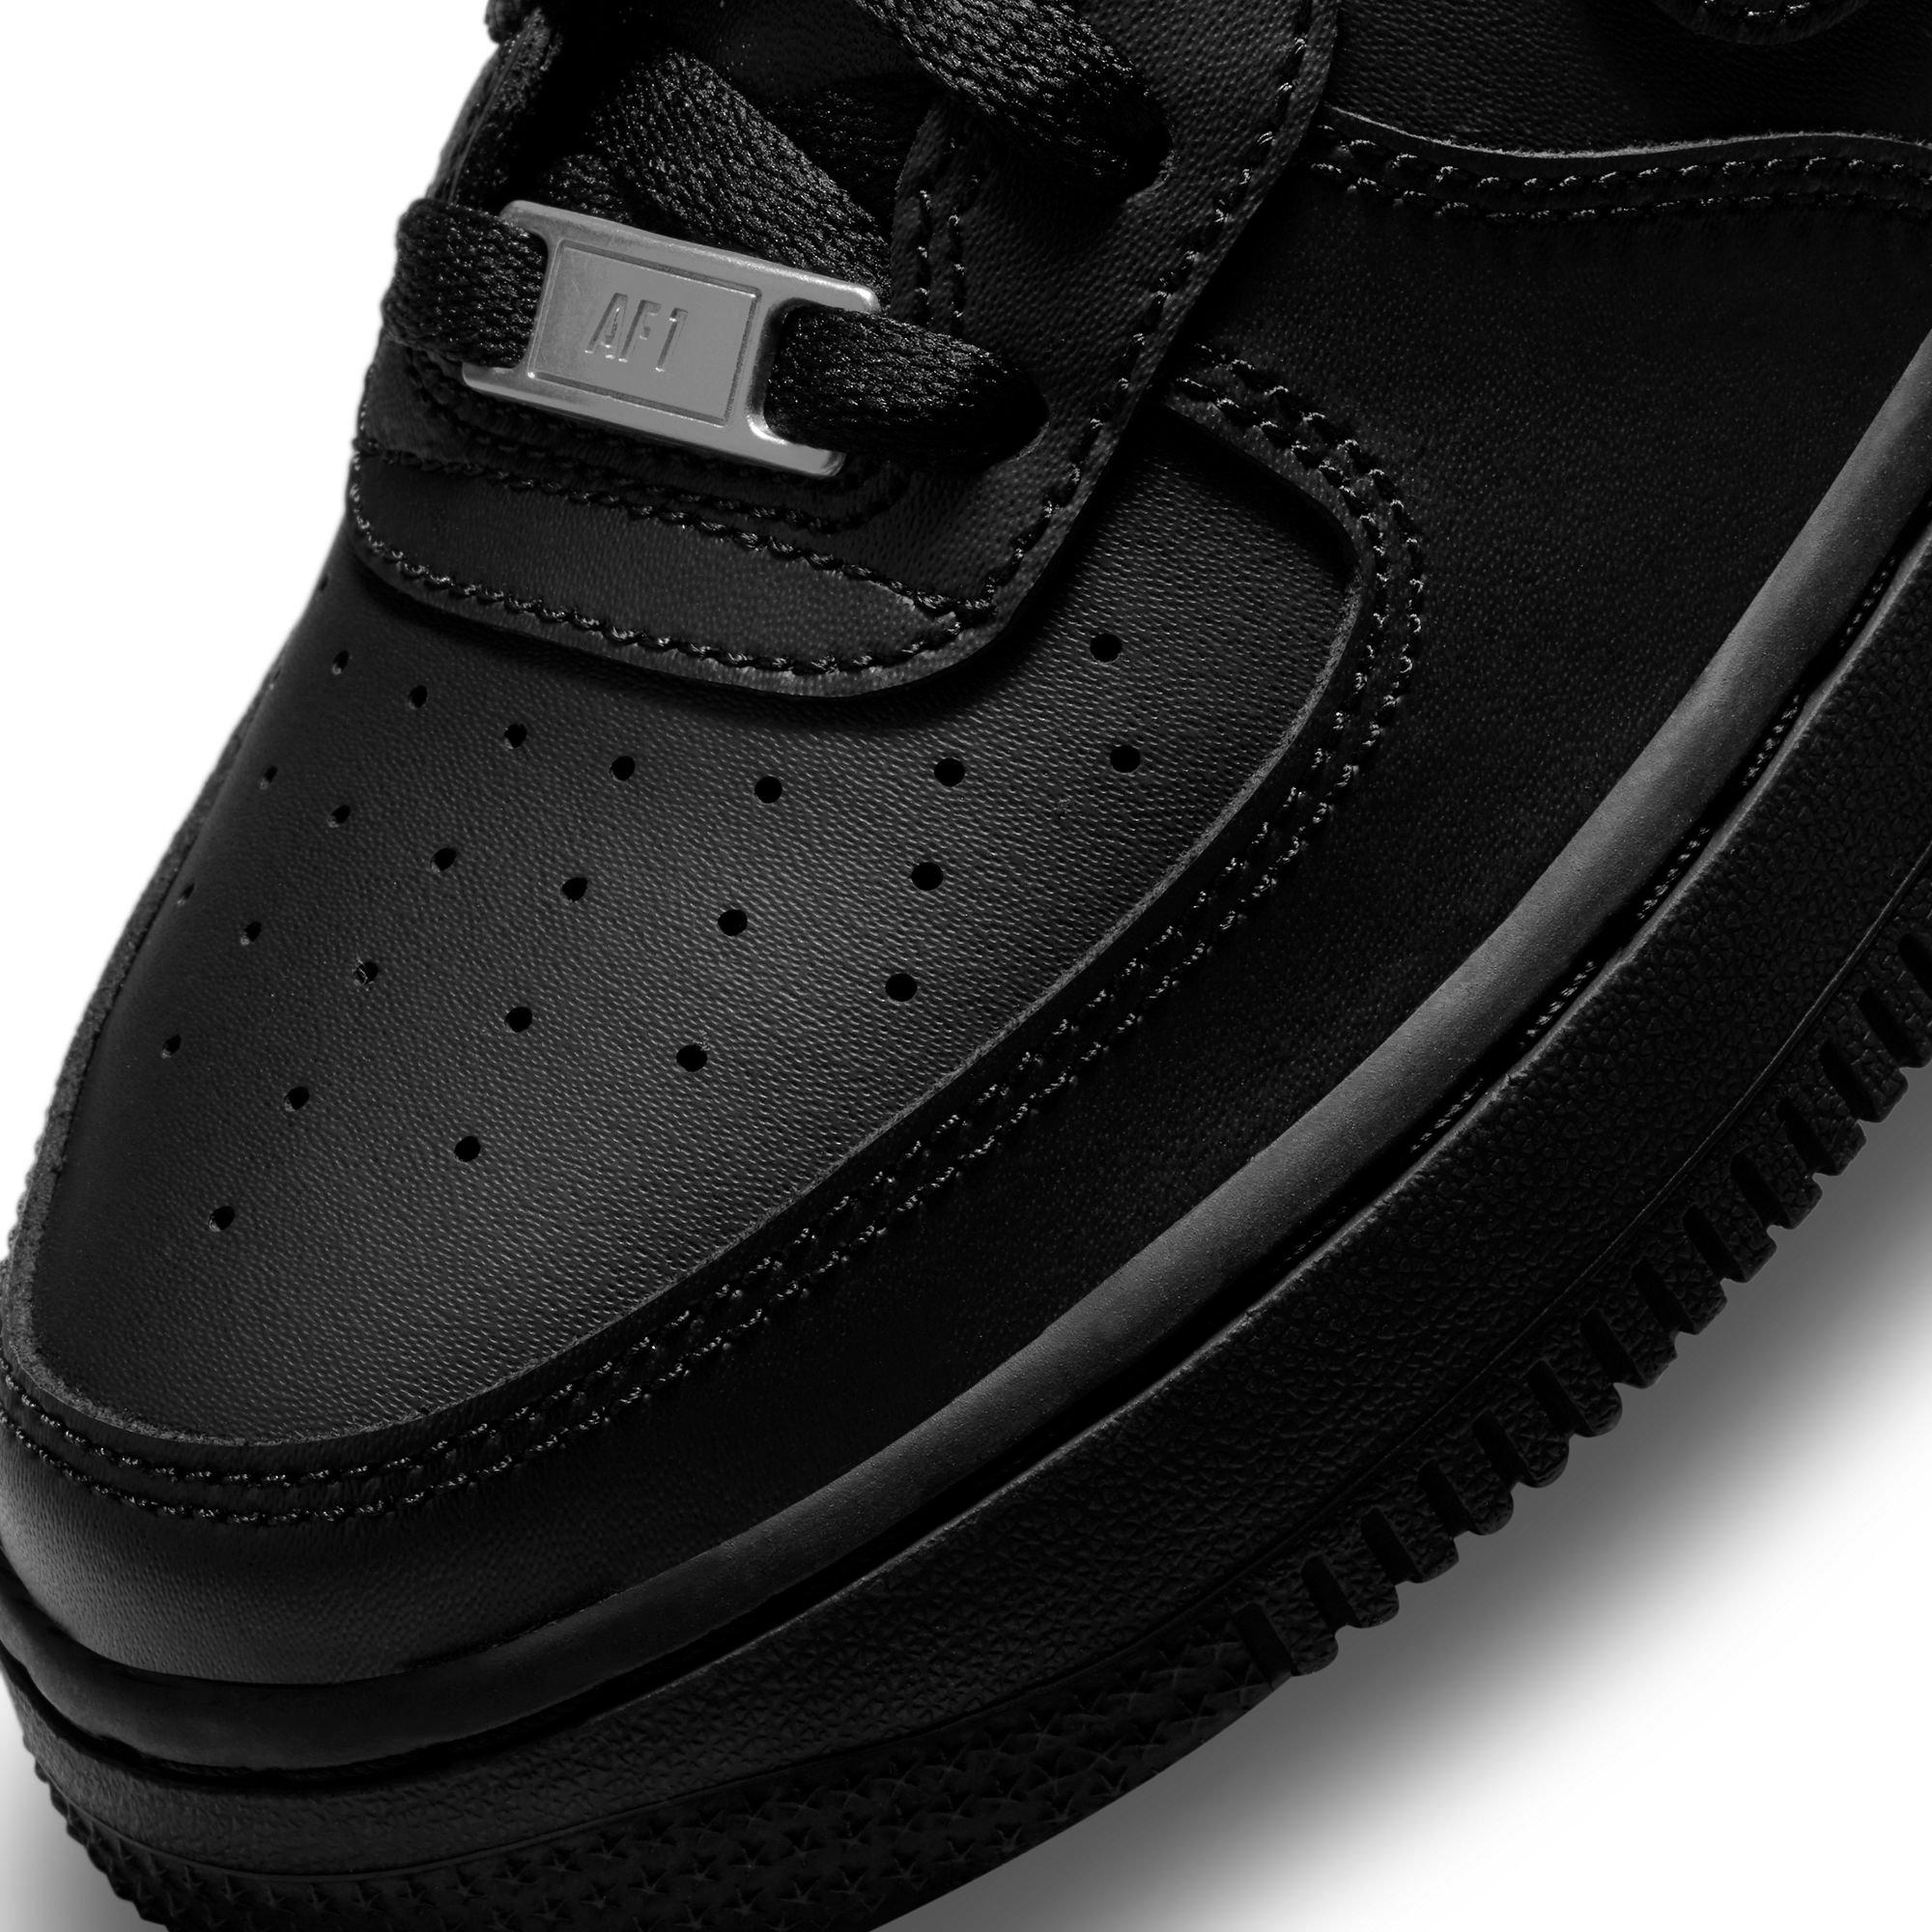 size 3 air force 1 black